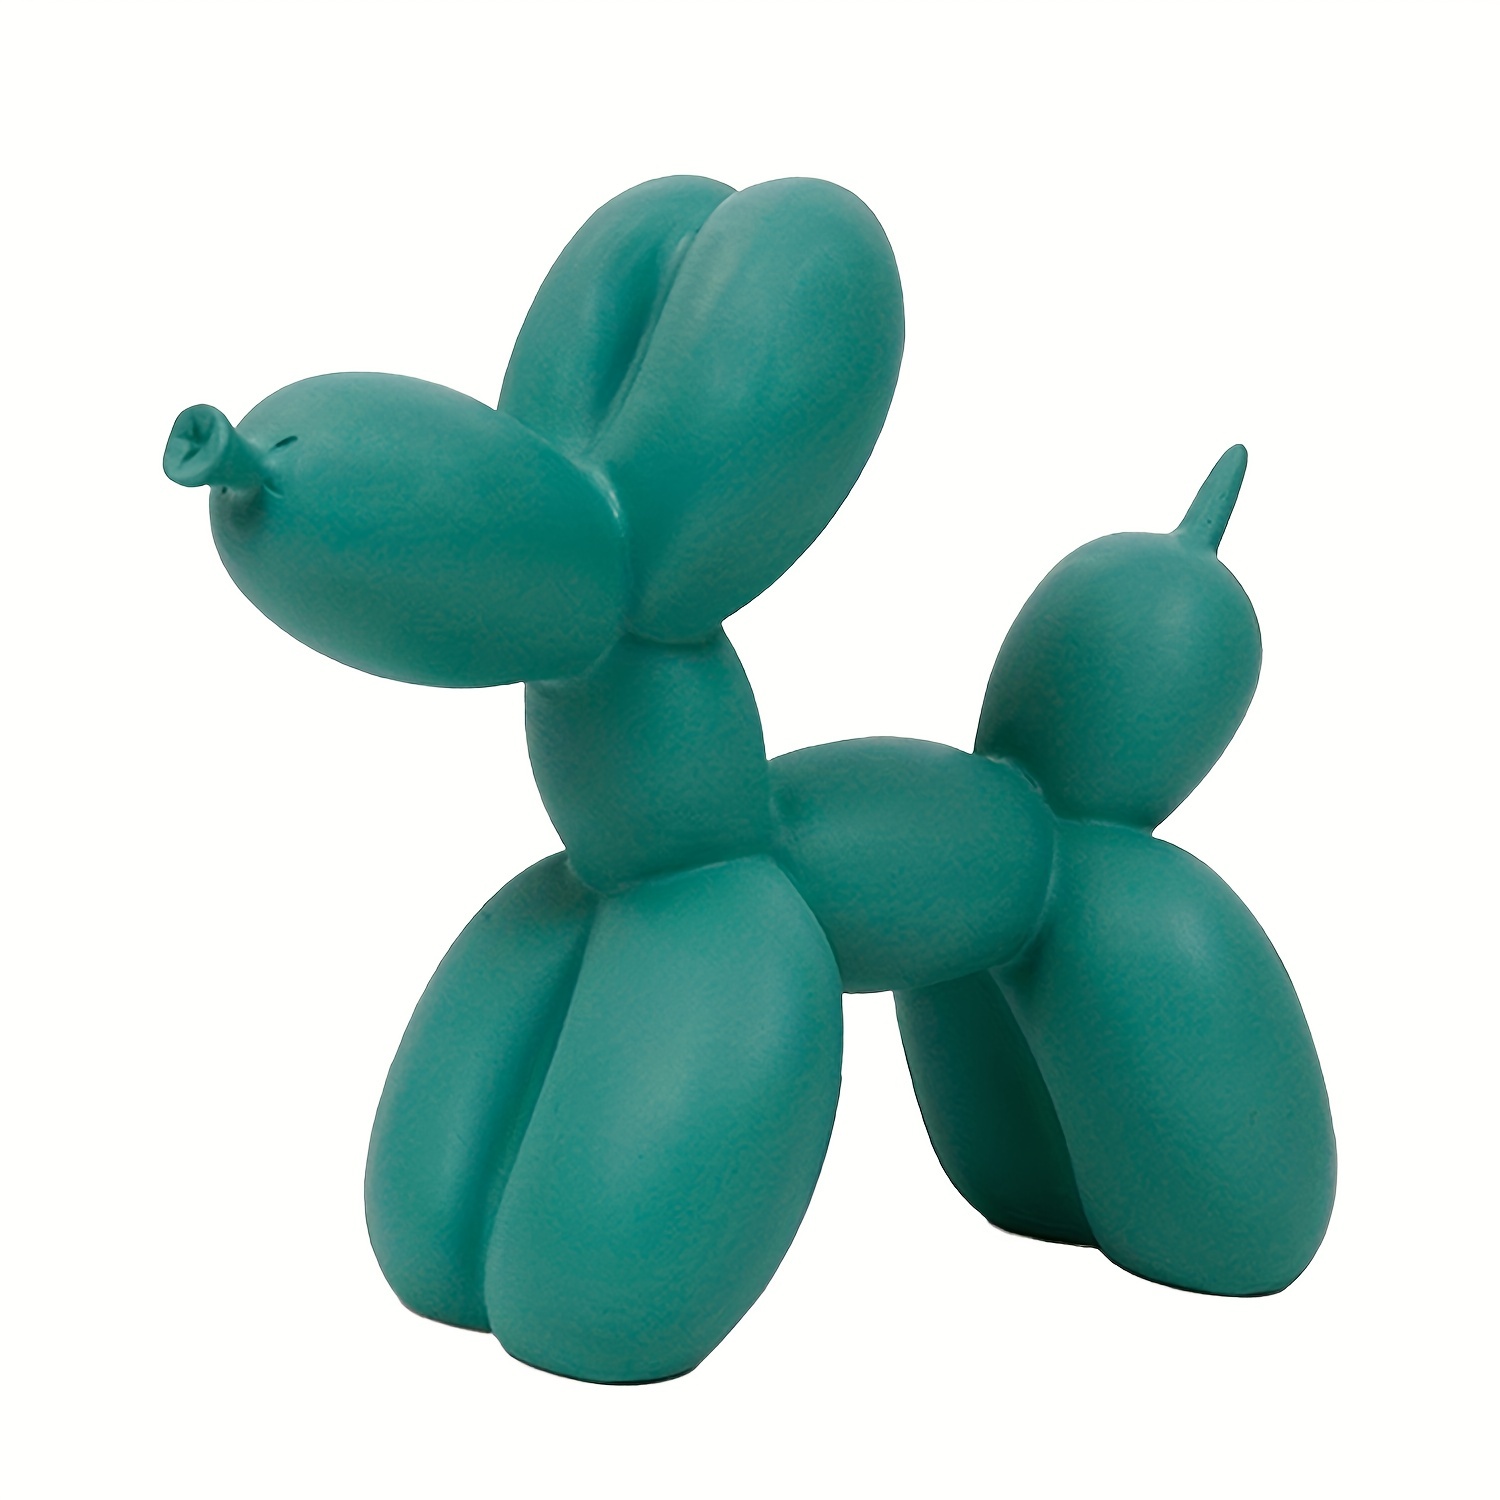 1pc Solid Color Creative Balloon Dog Sculpture Modern Home Decoration Trend  Animal Art Jewelry Collection Statue Bedroom Living Room Office Desk Resin